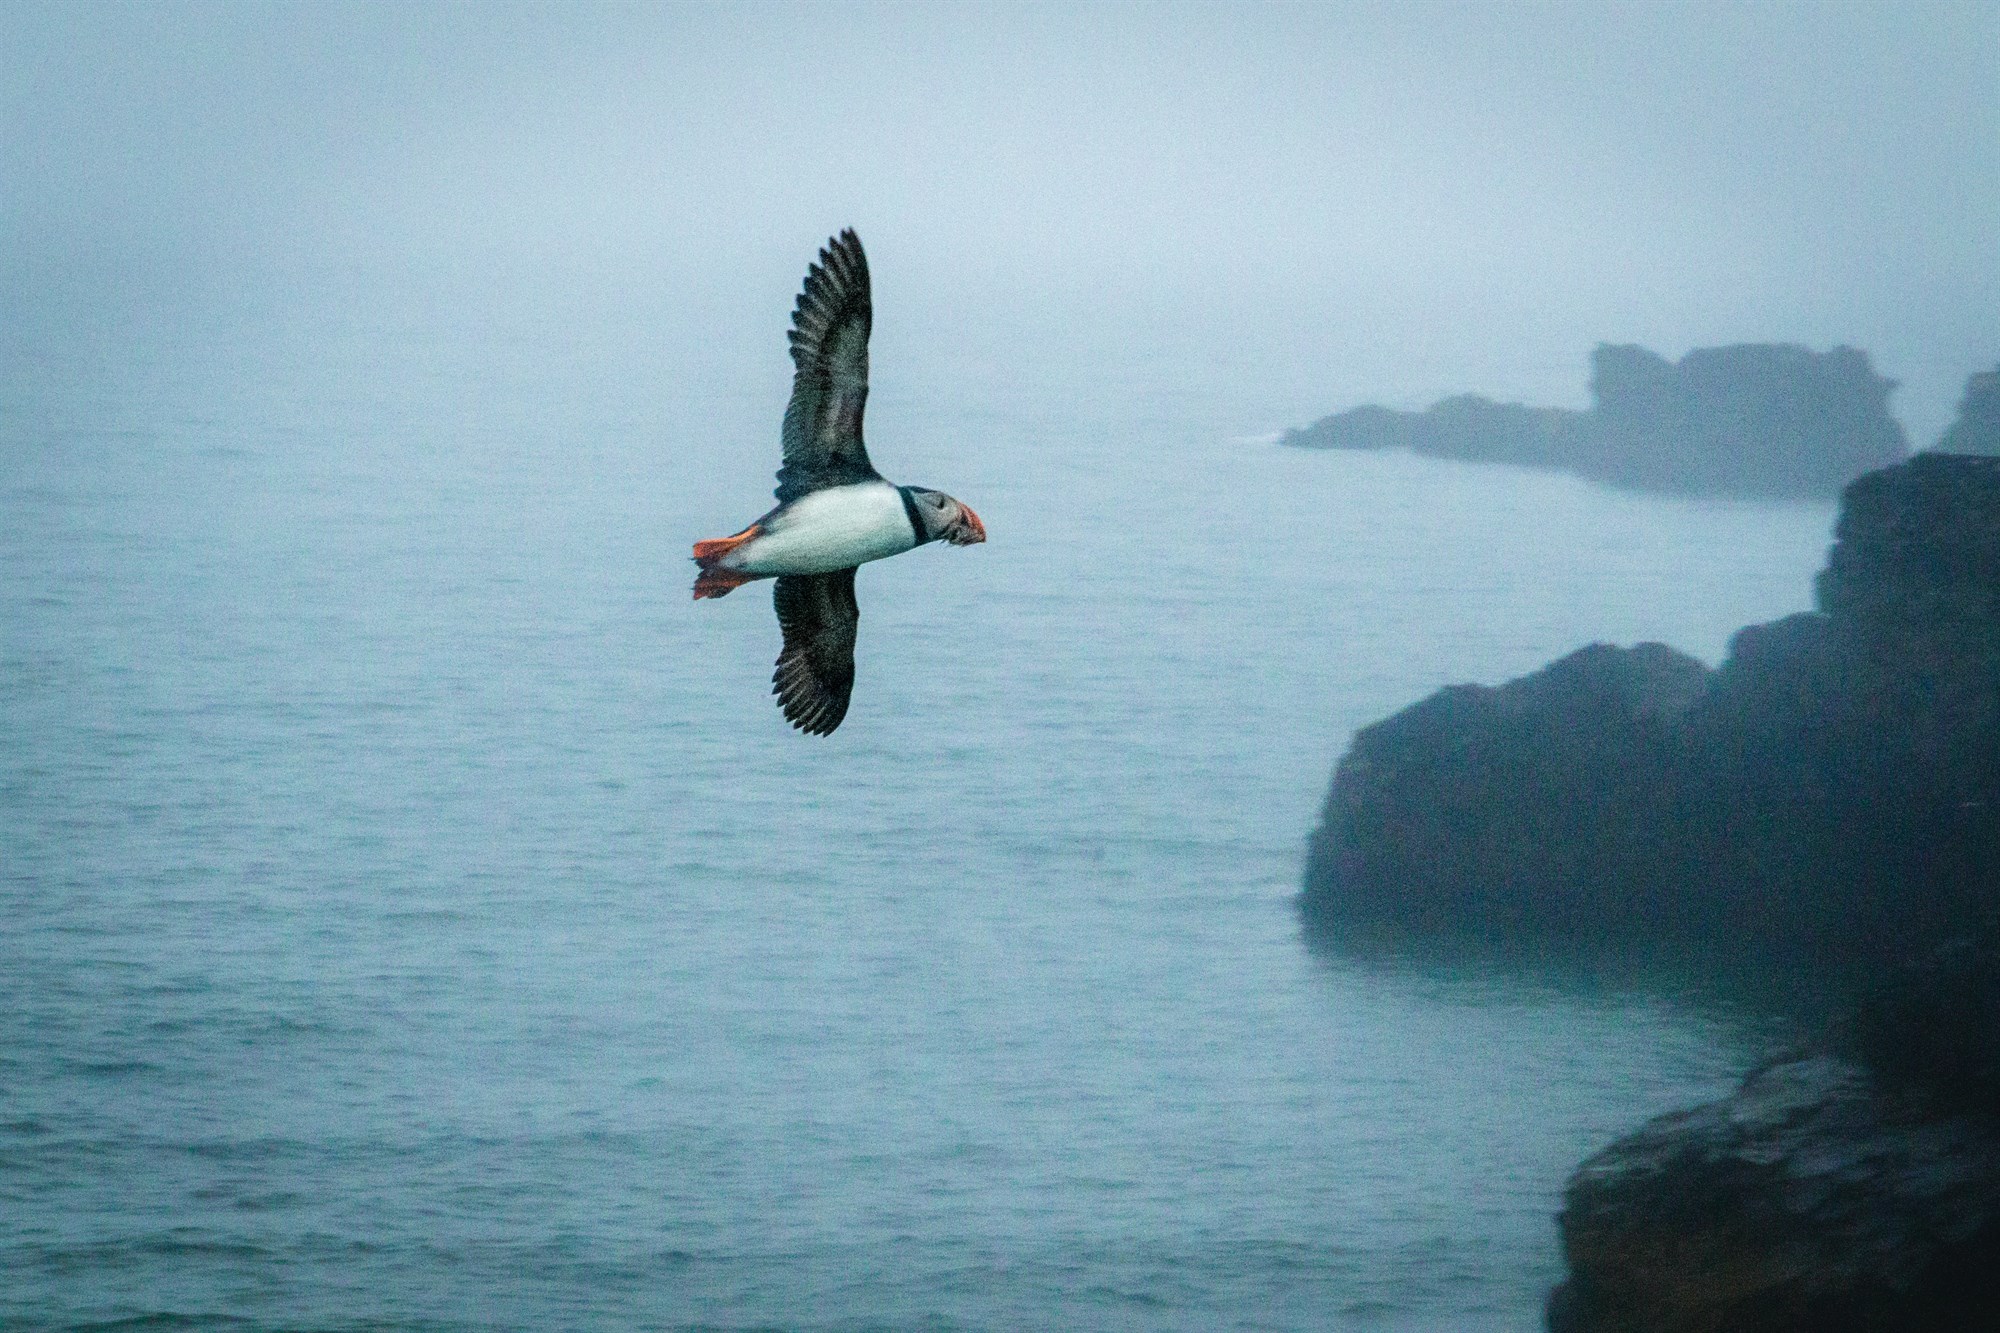 Puffin flying with fish in its beak towards Iceland’s rocky shores.